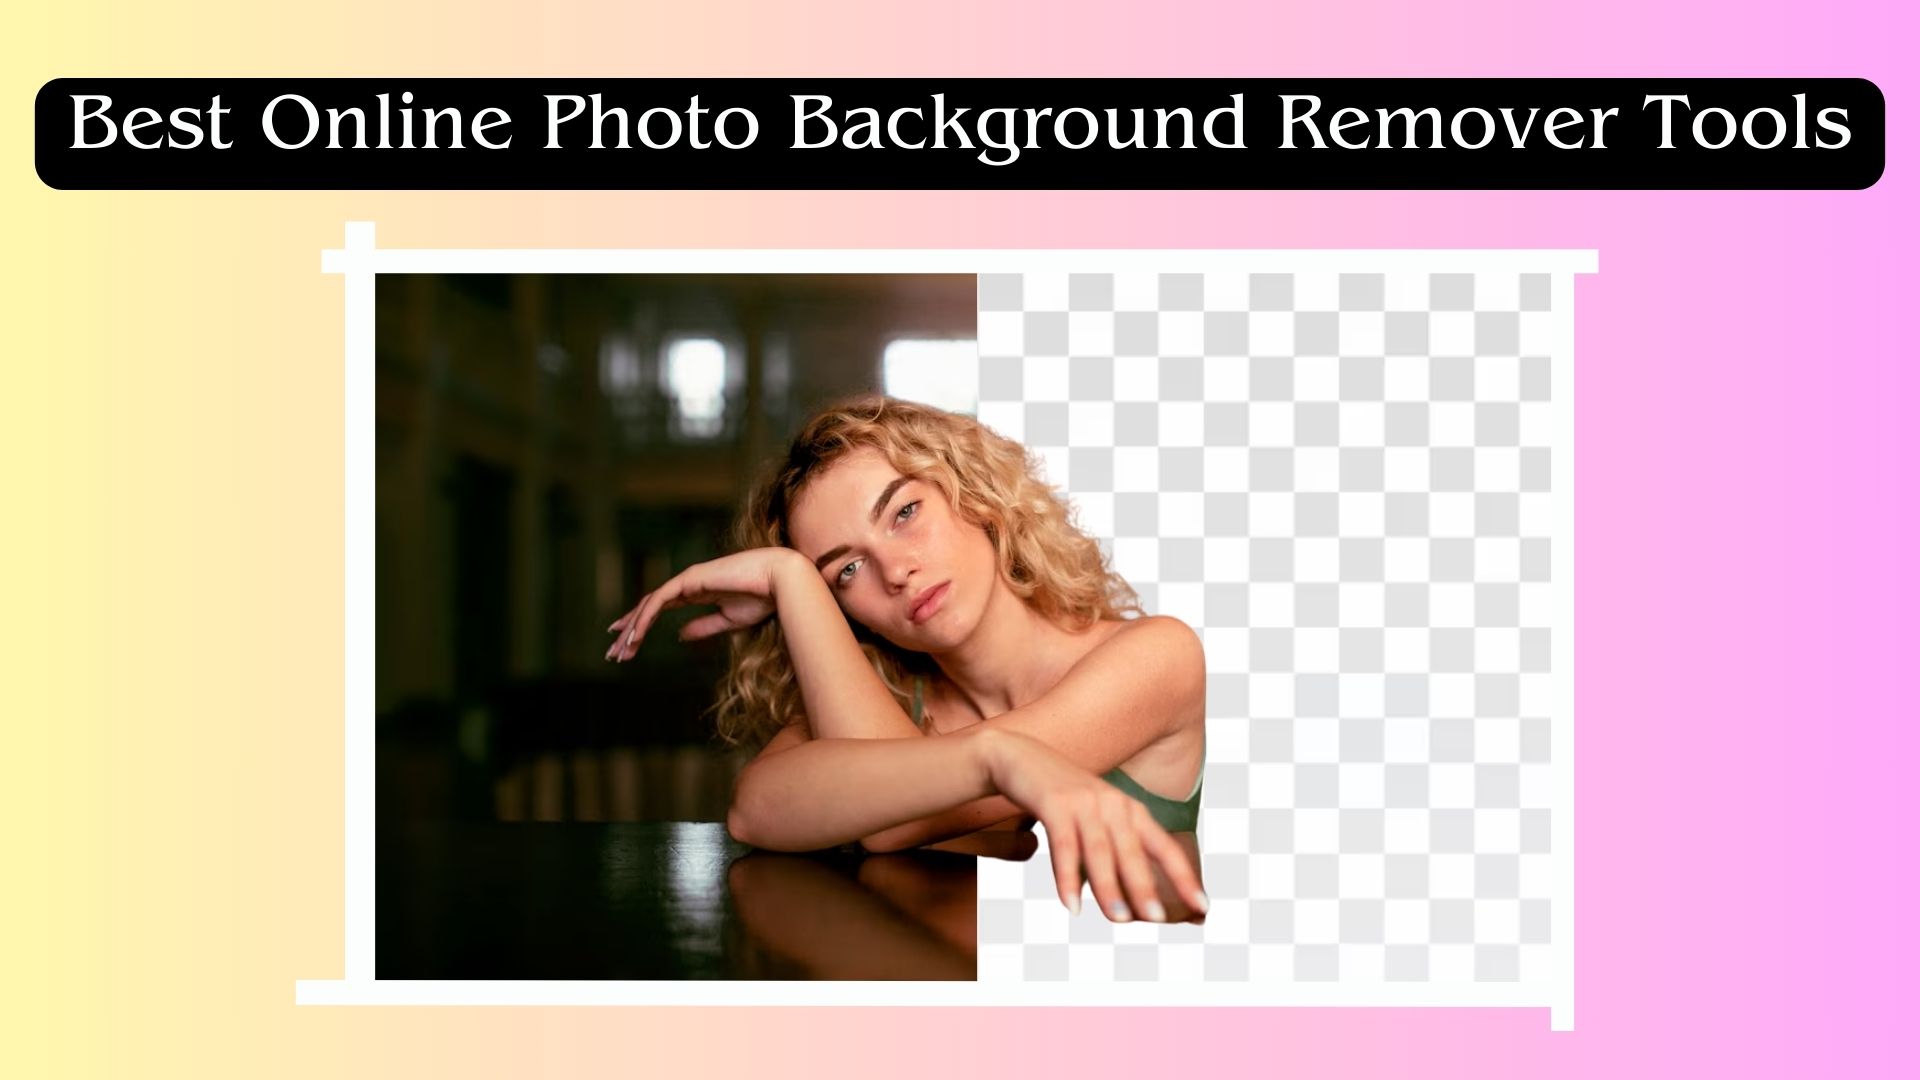 5 Best Online Photo Background Remover Tools